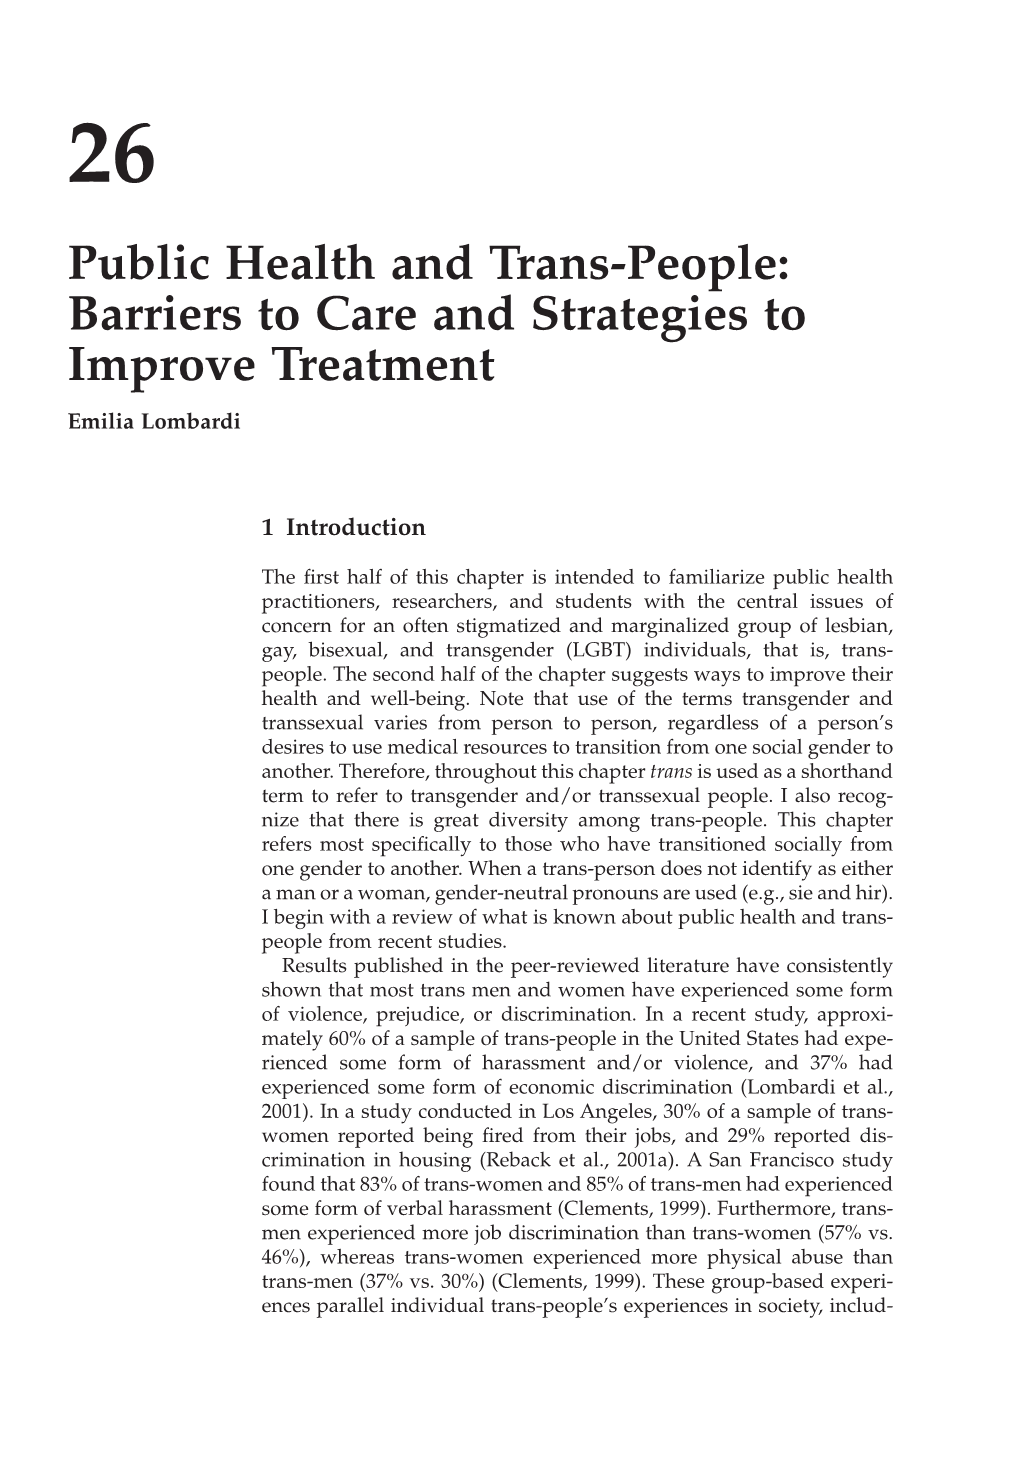 Public Health and Trans-People: Barriers to Care and Strategies to Improve Treatment Emilia Lombardi